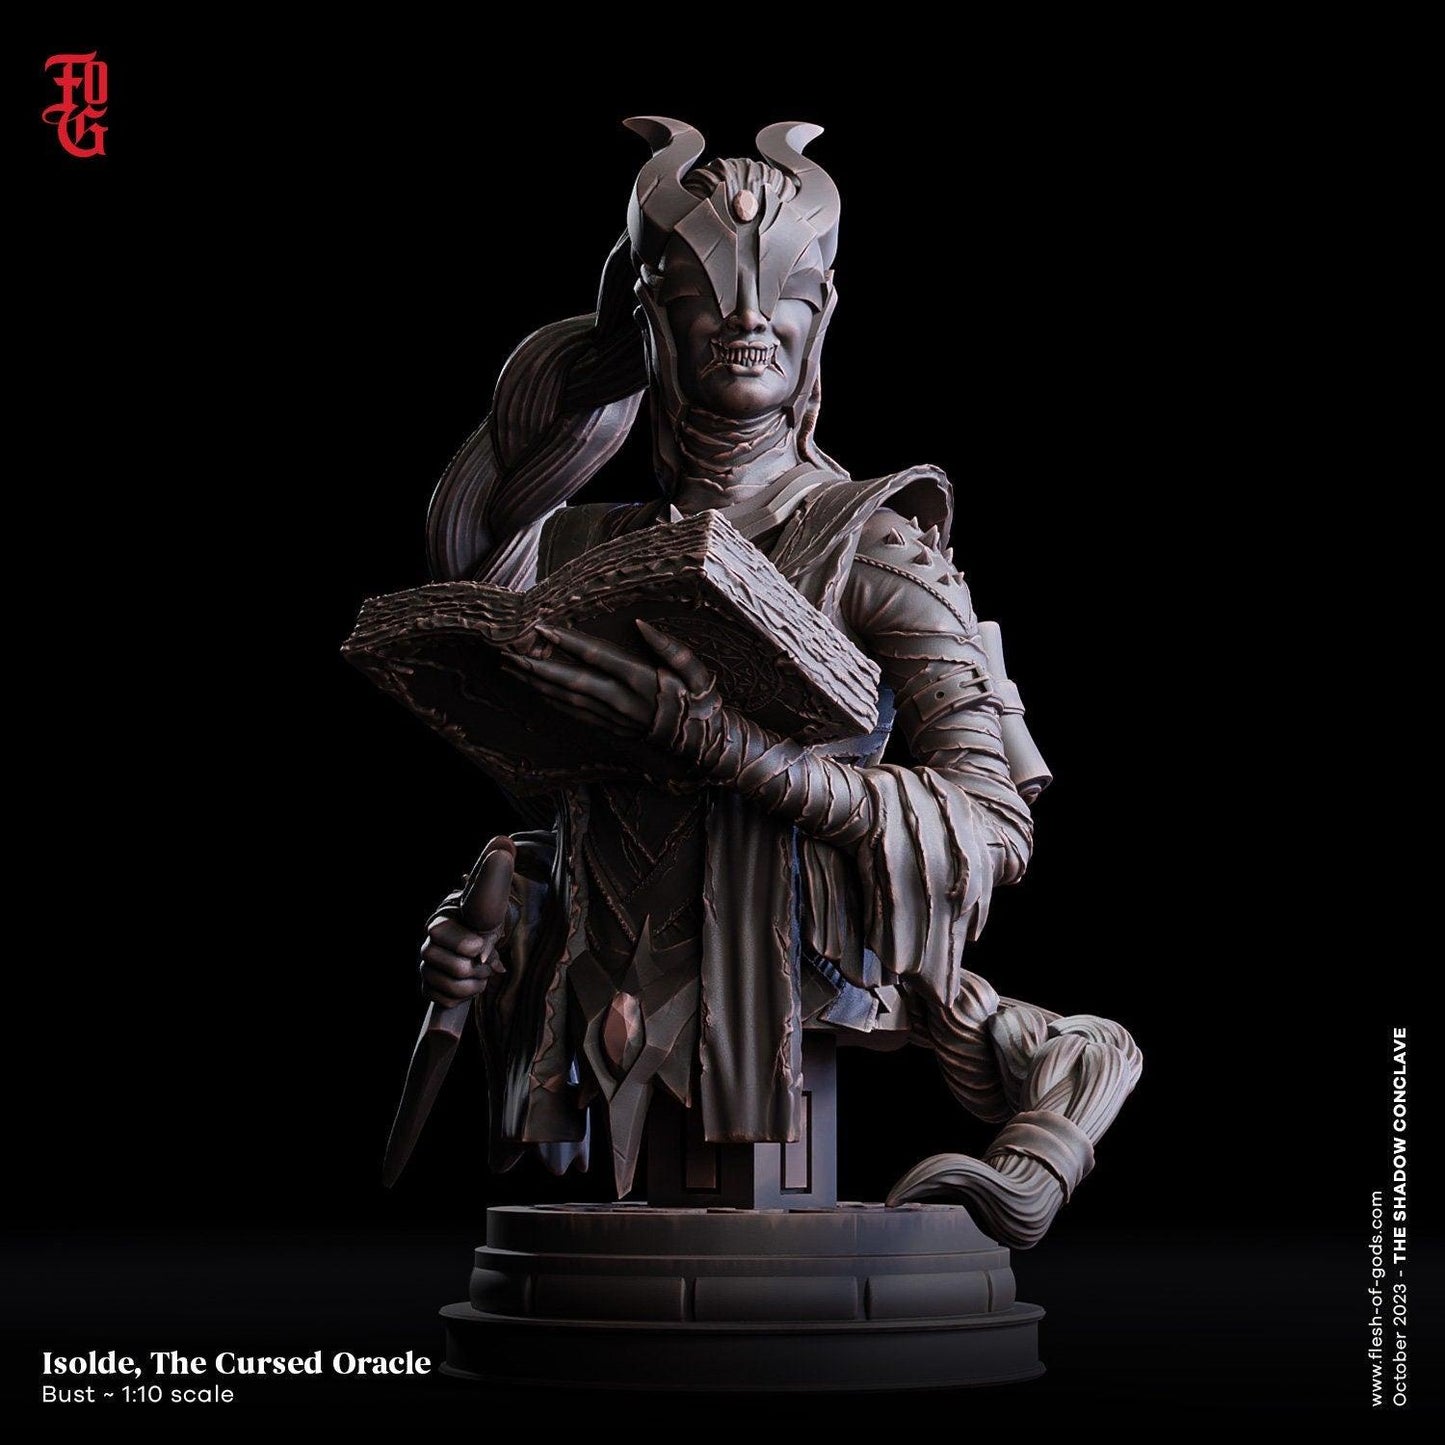 Isolde, the Cursed Oracle Miniature: A Mystic Figure for RPG Adventures | 32mm Scale or 75mm Scale - Plague Miniatures shop for DnD Miniatures